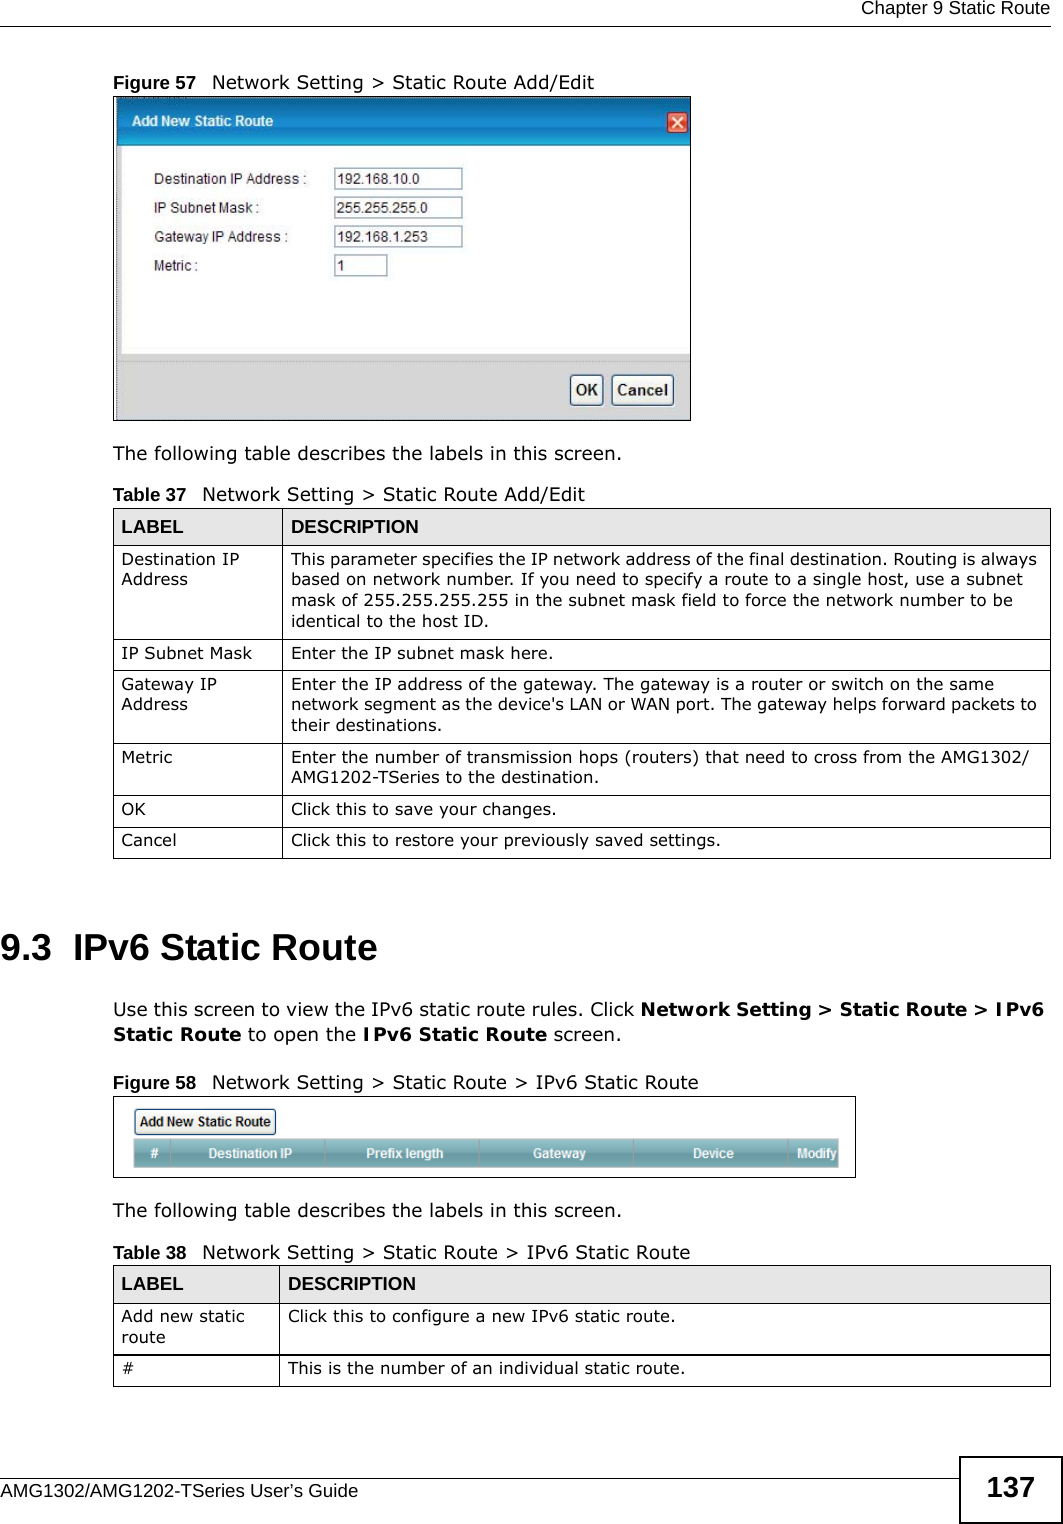  Chapter 9 Static RouteAMG1302/AMG1202-TSeries User’s Guide 137Figure 57   Network Setting &gt; Static Route Add/EditThe following table describes the labels in this screen. 9.3  IPv6 Static RouteUse this screen to view the IPv6 static route rules. Click Network Setting &gt; Static Route &gt; IPv6 Static Route to open the IPv6 Static Route screen.Figure 58   Network Setting &gt; Static Route &gt; IPv6 Static RouteThe following table describes the labels in this screen. Table 37   Network Setting &gt; Static Route Add/EditLABEL DESCRIPTIONDestination IP AddressThis parameter specifies the IP network address of the final destination. Routing is always based on network number. If you need to specify a route to a single host, use a subnet mask of 255.255.255.255 in the subnet mask field to force the network number to be identical to the host ID.IP Subnet Mask  Enter the IP subnet mask here.Gateway IP AddressEnter the IP address of the gateway. The gateway is a router or switch on the same network segment as the device&apos;s LAN or WAN port. The gateway helps forward packets to their destinations.Metric Enter the number of transmission hops (routers) that need to cross from the AMG1302/AMG1202-TSeries to the destination.OK Click this to save your changes.Cancel Click this to restore your previously saved settings.Table 38   Network Setting &gt; Static Route &gt; IPv6 Static RouteLABEL DESCRIPTIONAdd new static routeClick this to configure a new IPv6 static route.#This is the number of an individual static route.